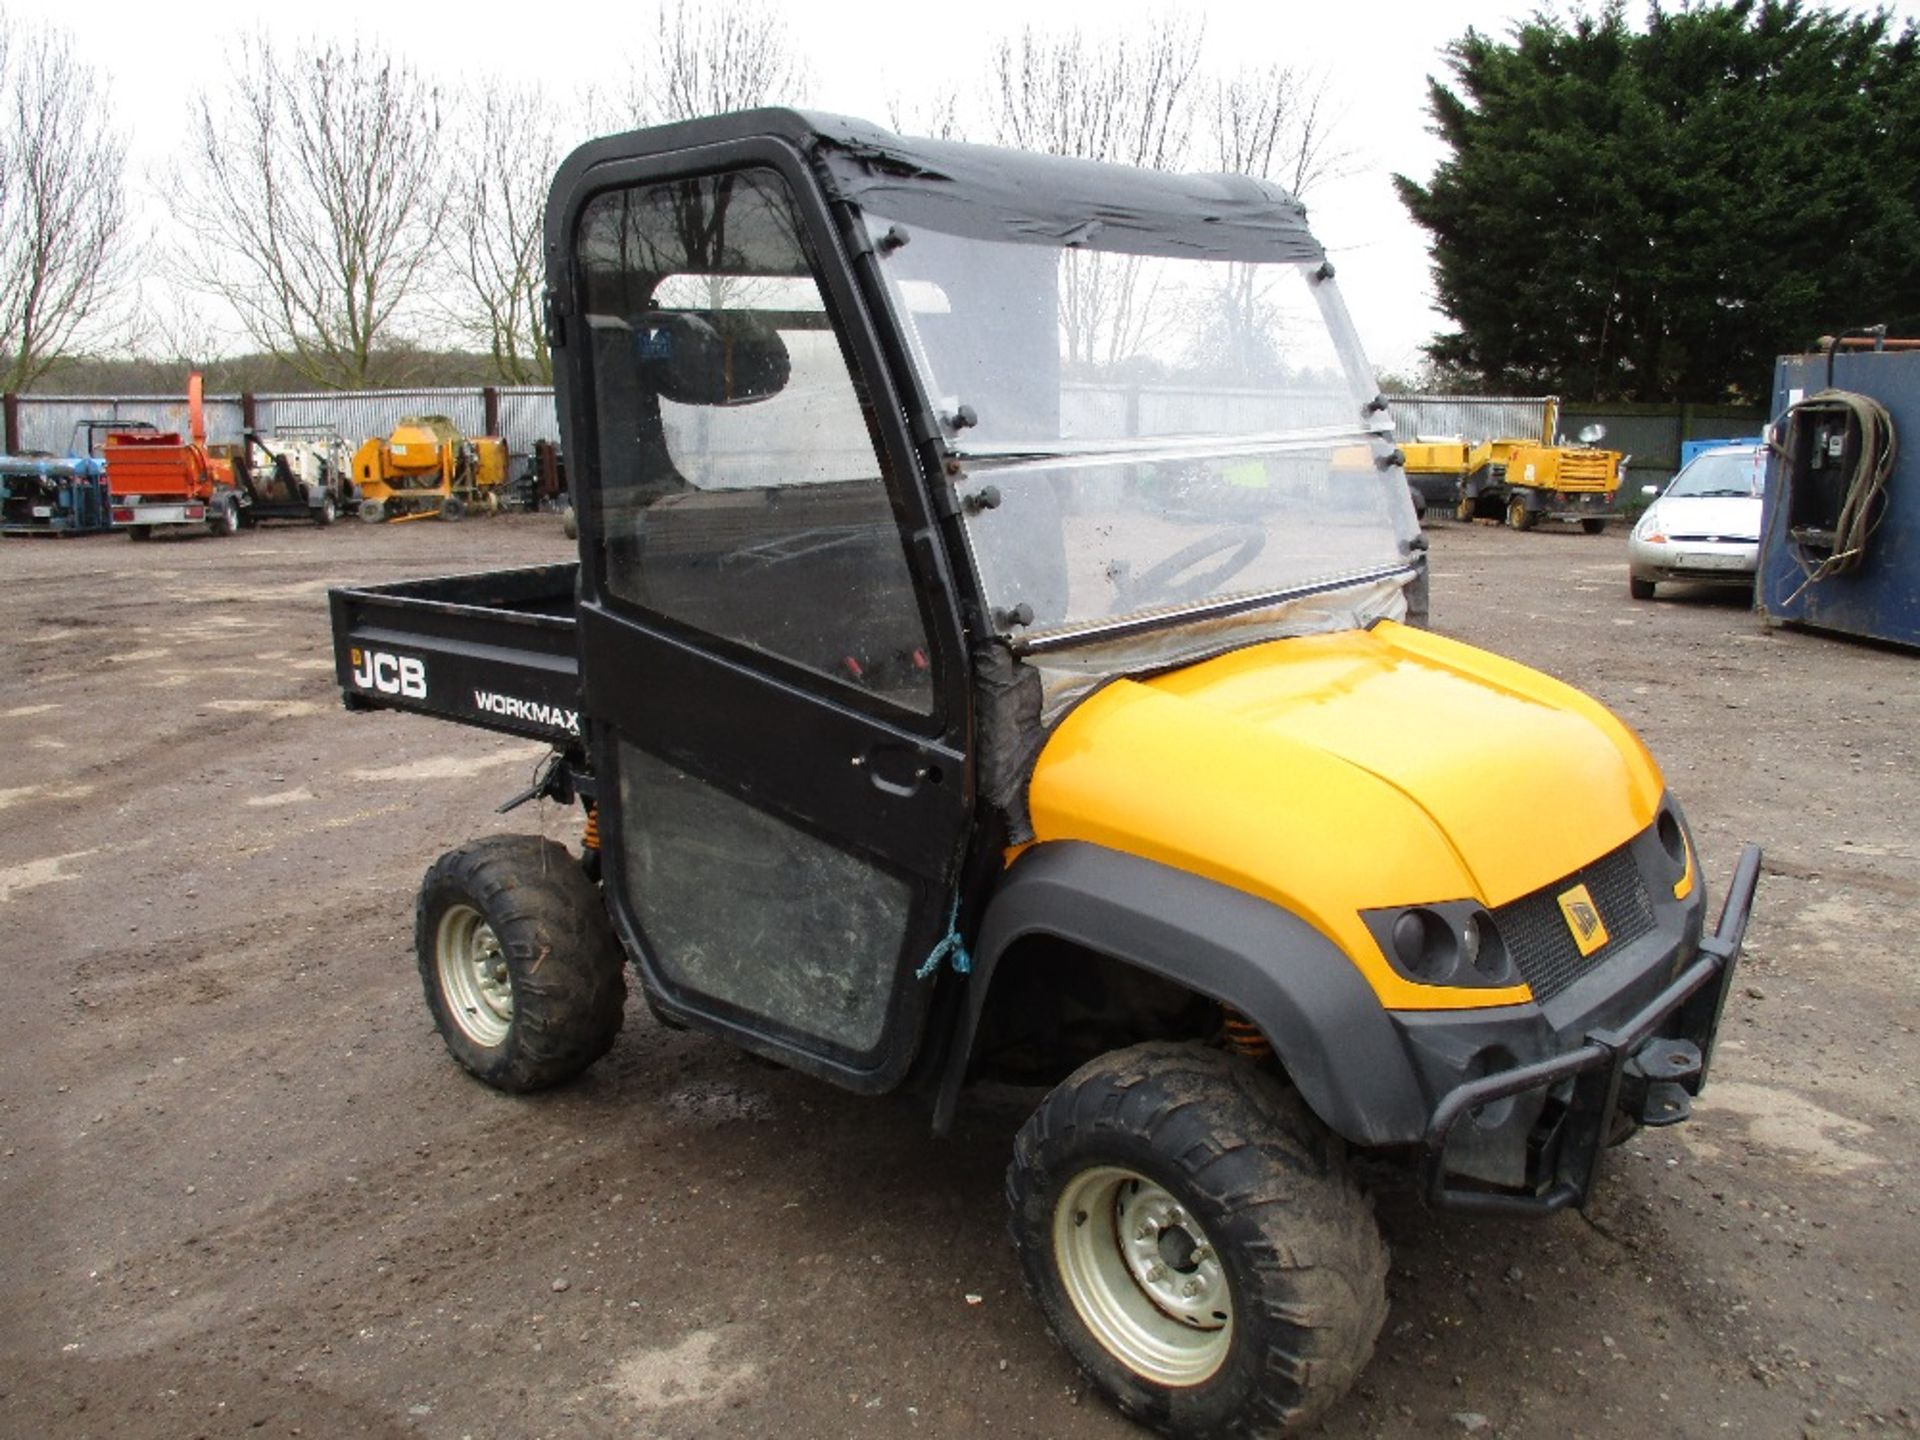 JCB Workmax off road utility vehicle year 2012 build.